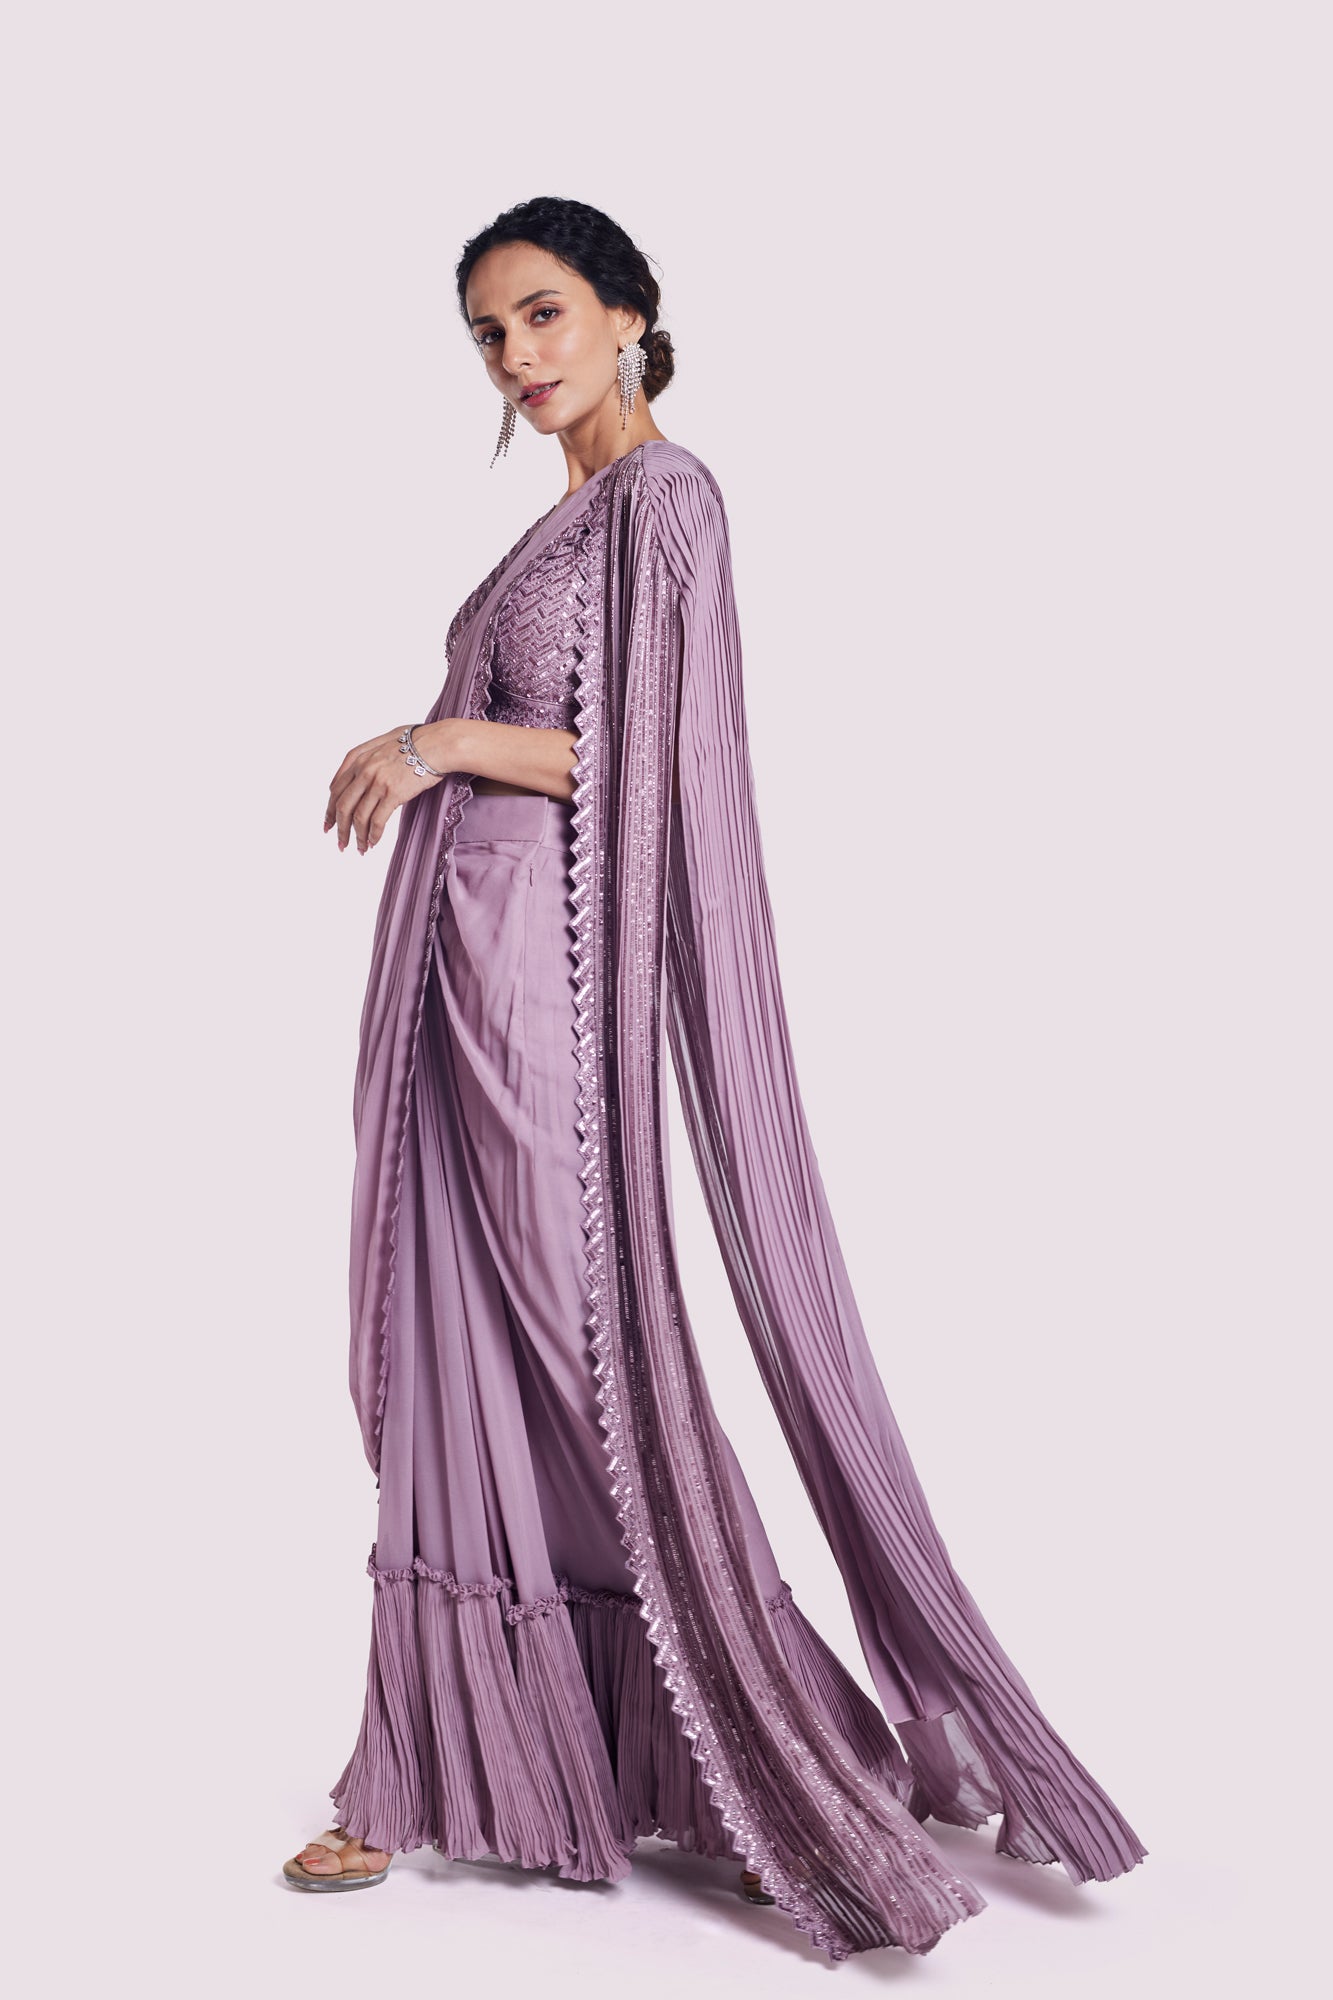 Buy mauve georgette draped saree online in USA with longline cape. Look your best at parties and weddings in beautiful designer sarees, embroidered sarees, handwoven sarees, silk sarees, organza saris from Pure Elegance Indian saree store in USA.-saree